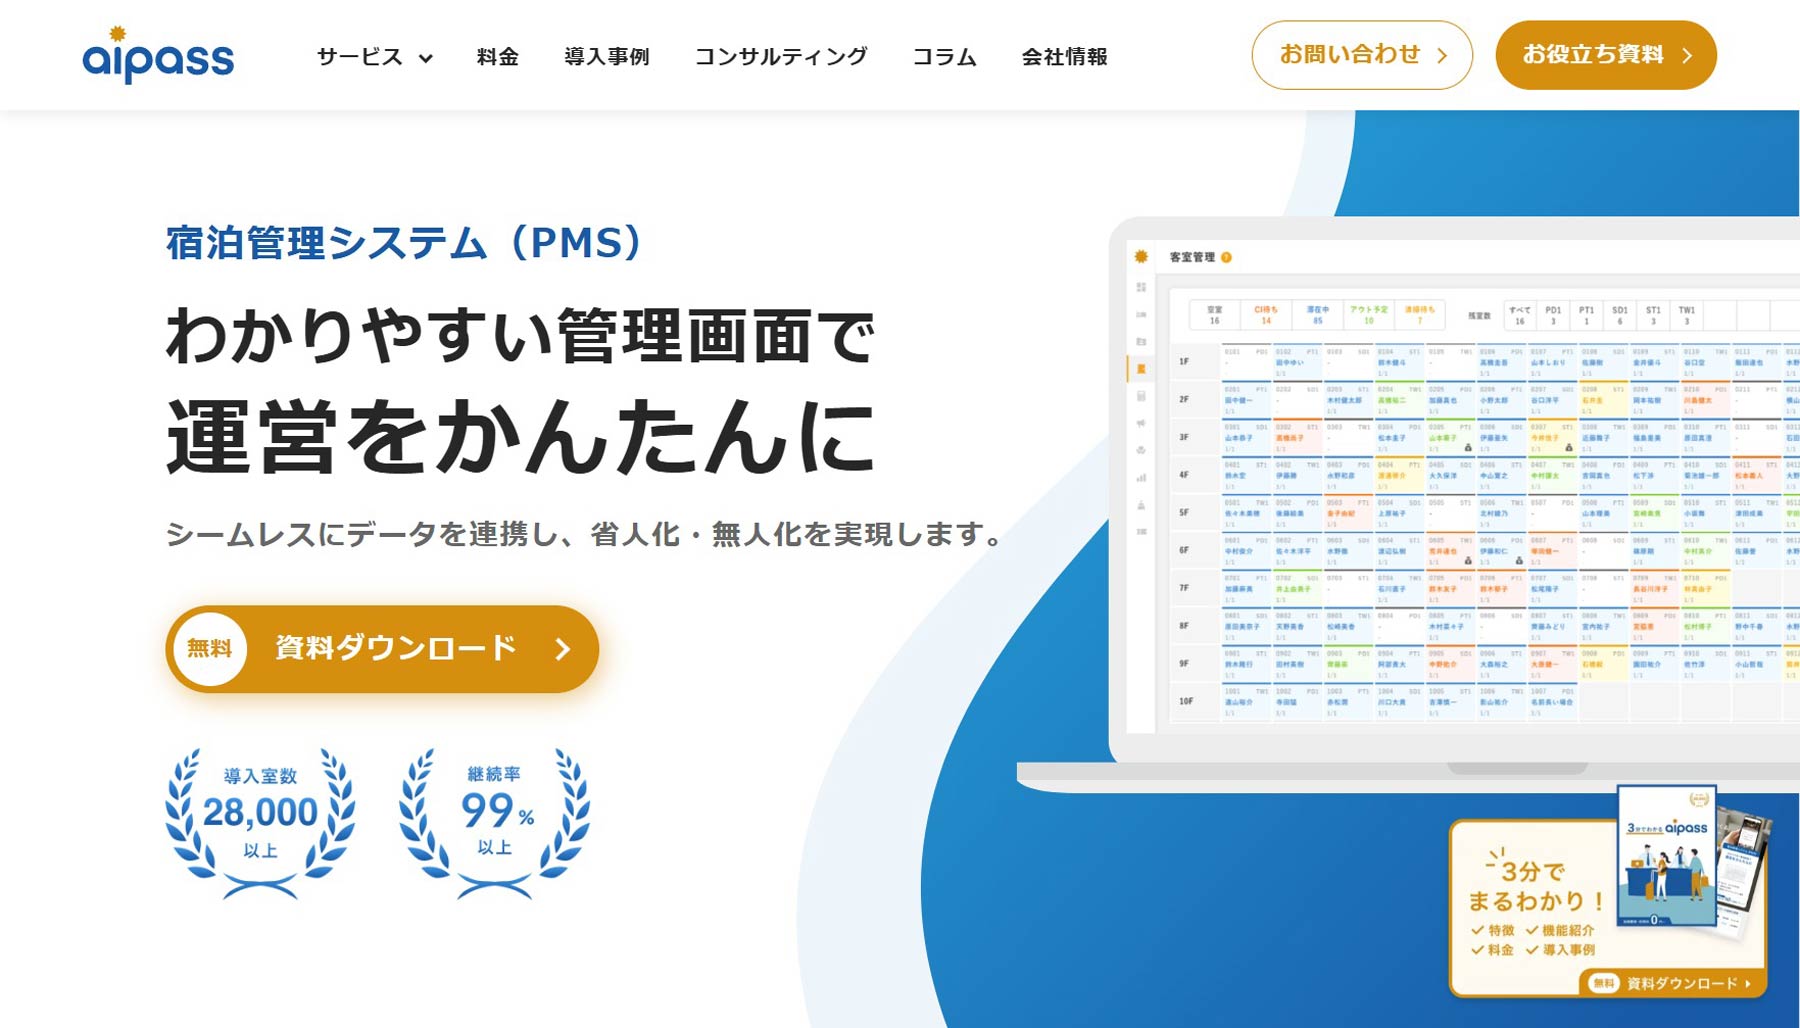 aipass for hotels公式Webサイト